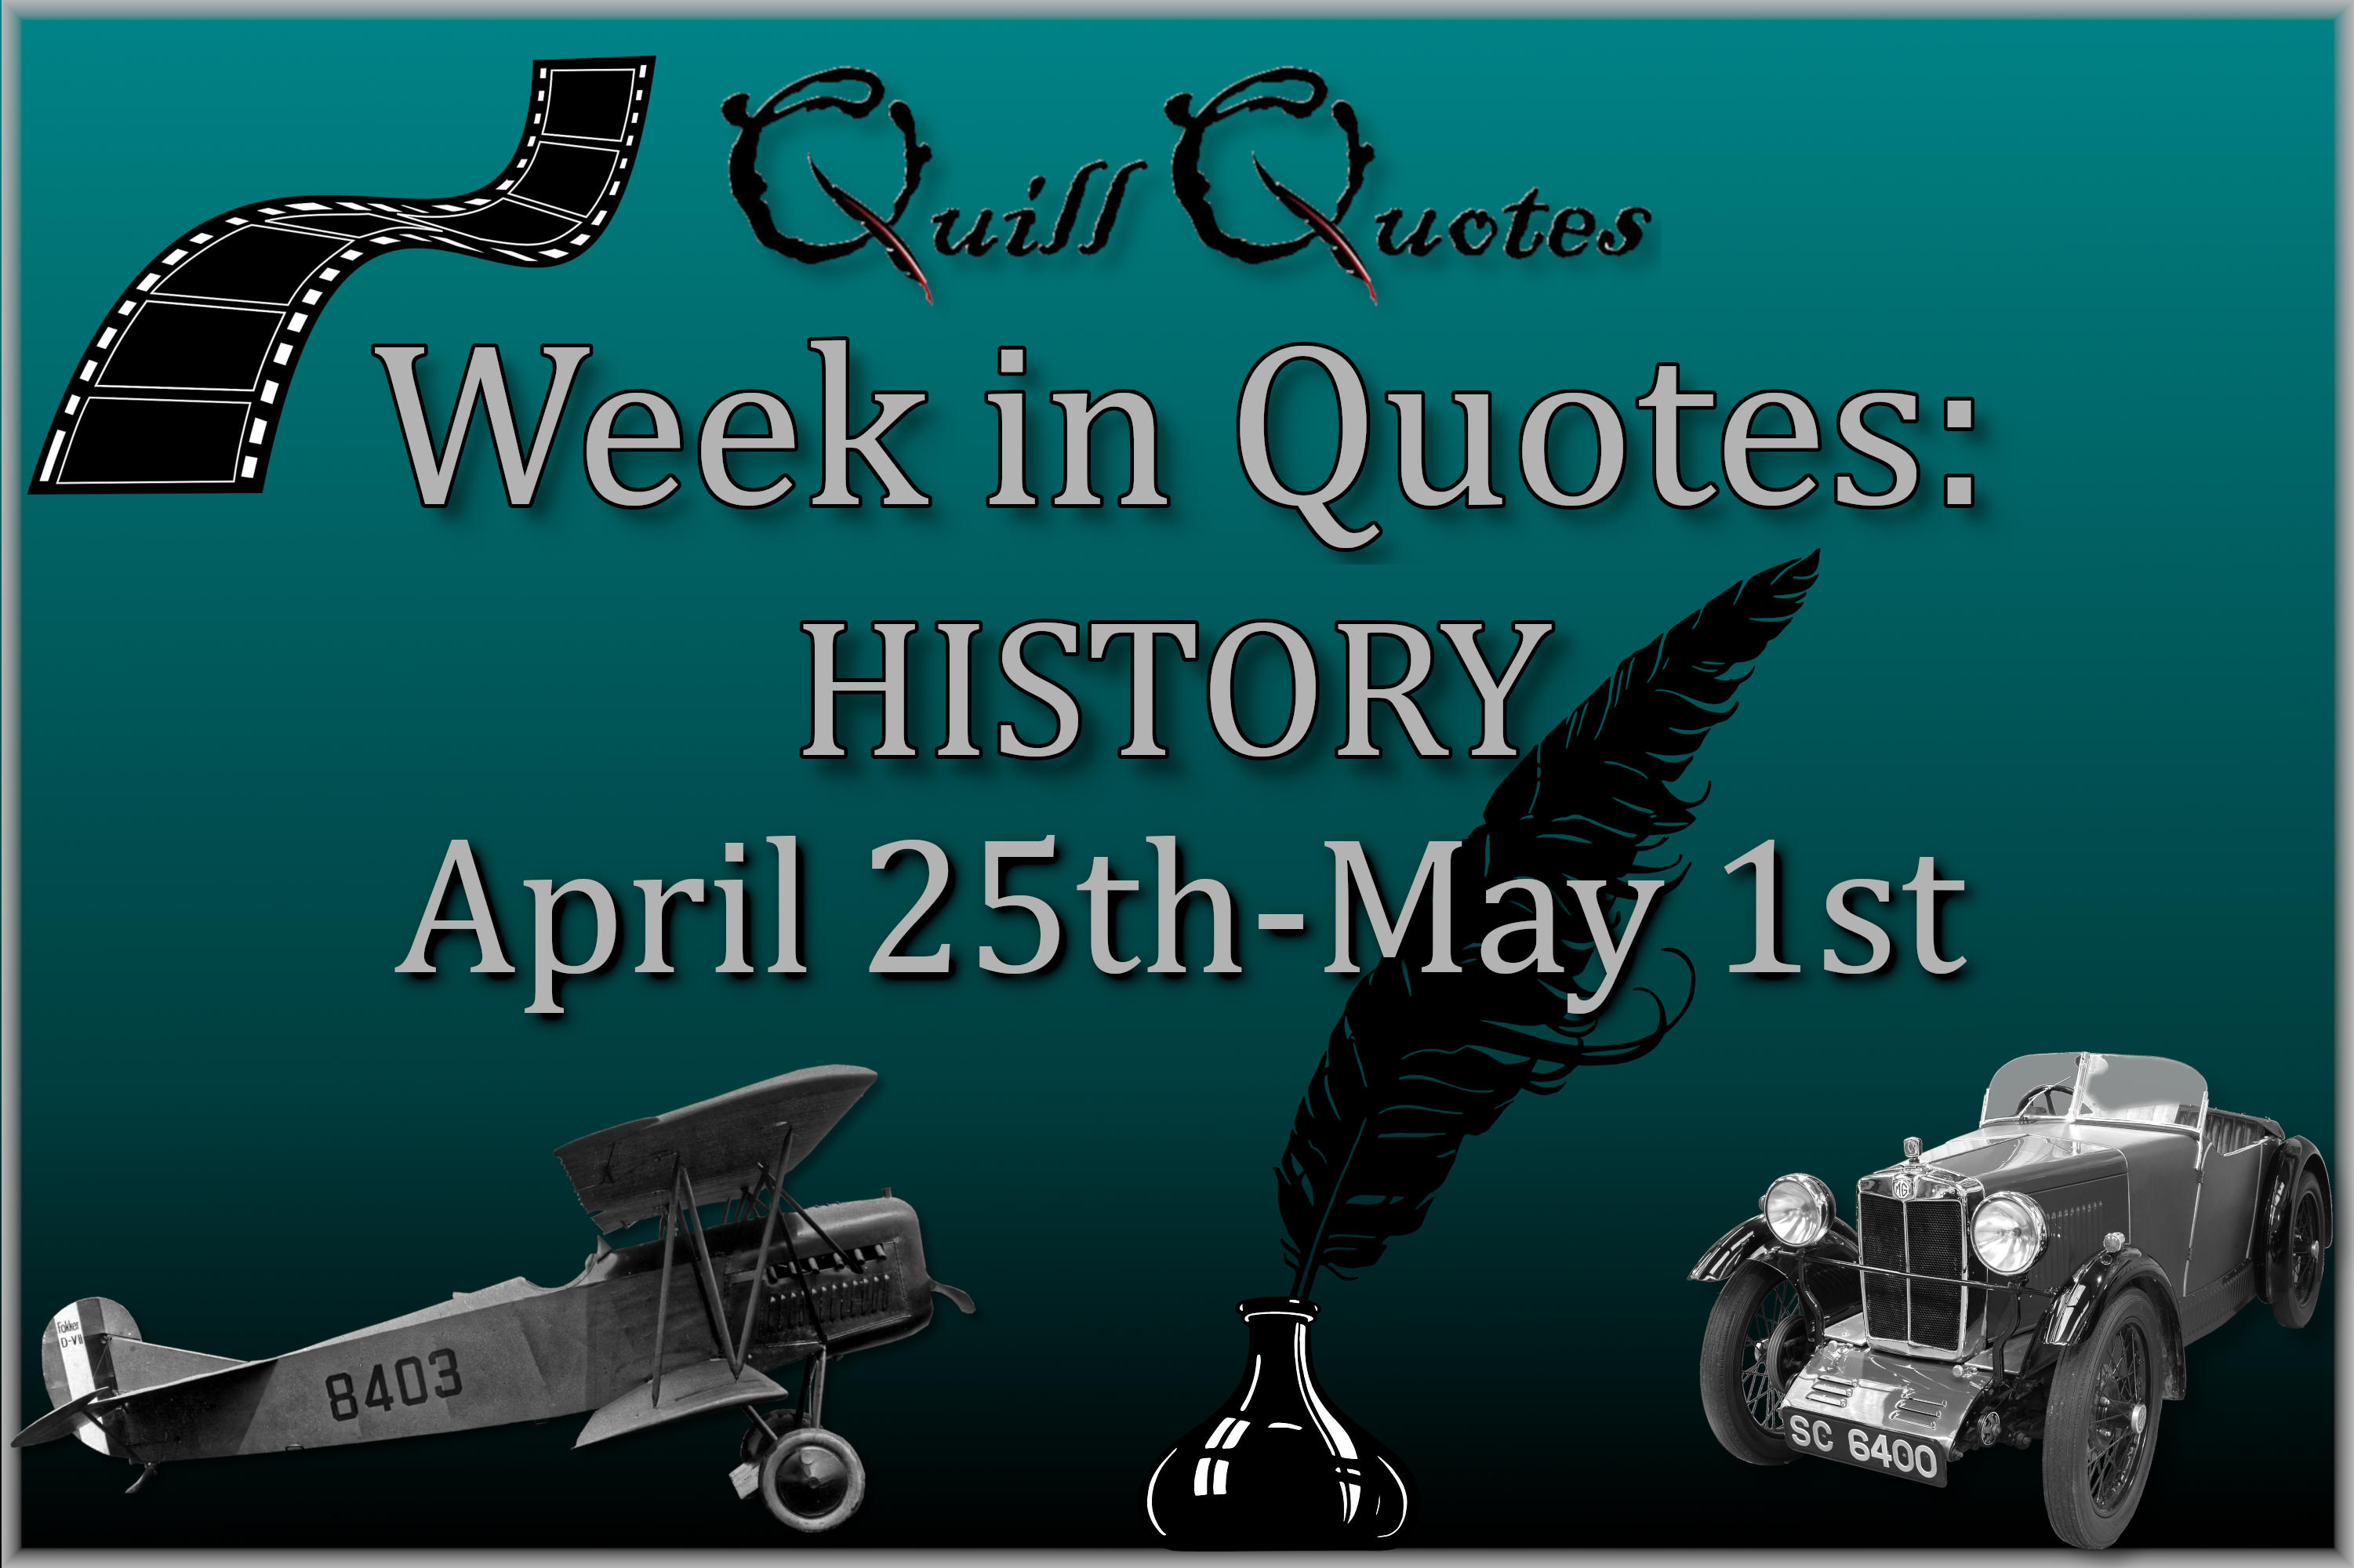 Quill Quotes Week in Quotes: HISTORY April 25th-May 1st